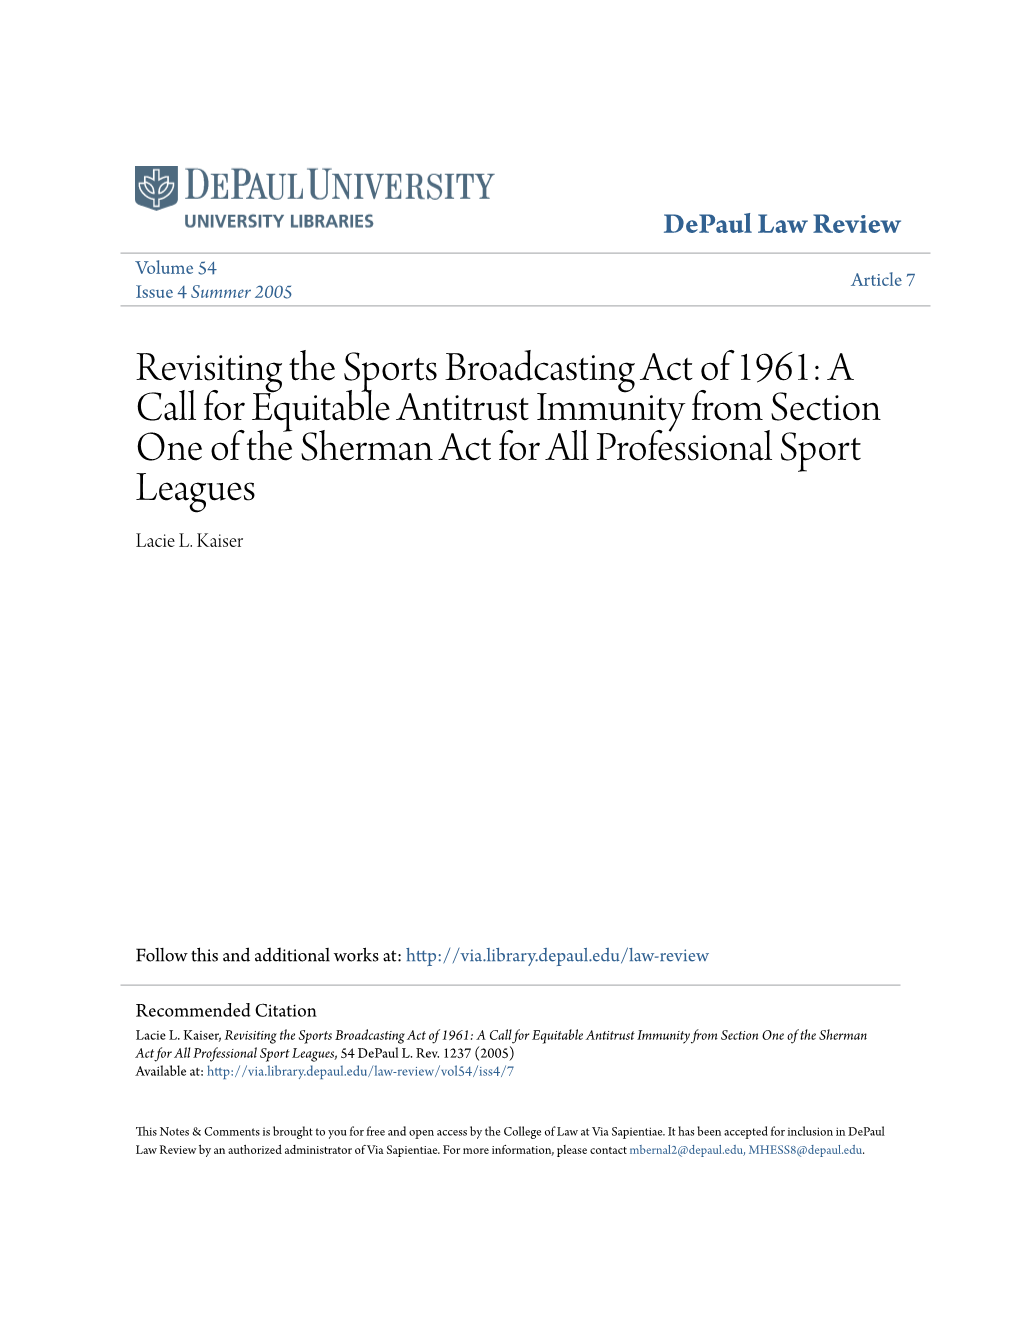 Revisiting the Sports Broadcasting Act of 1961: a Call for Equitable Antitrust Immunity from Section One of the Sherman Act for All Professional Sport Leagues Lacie L